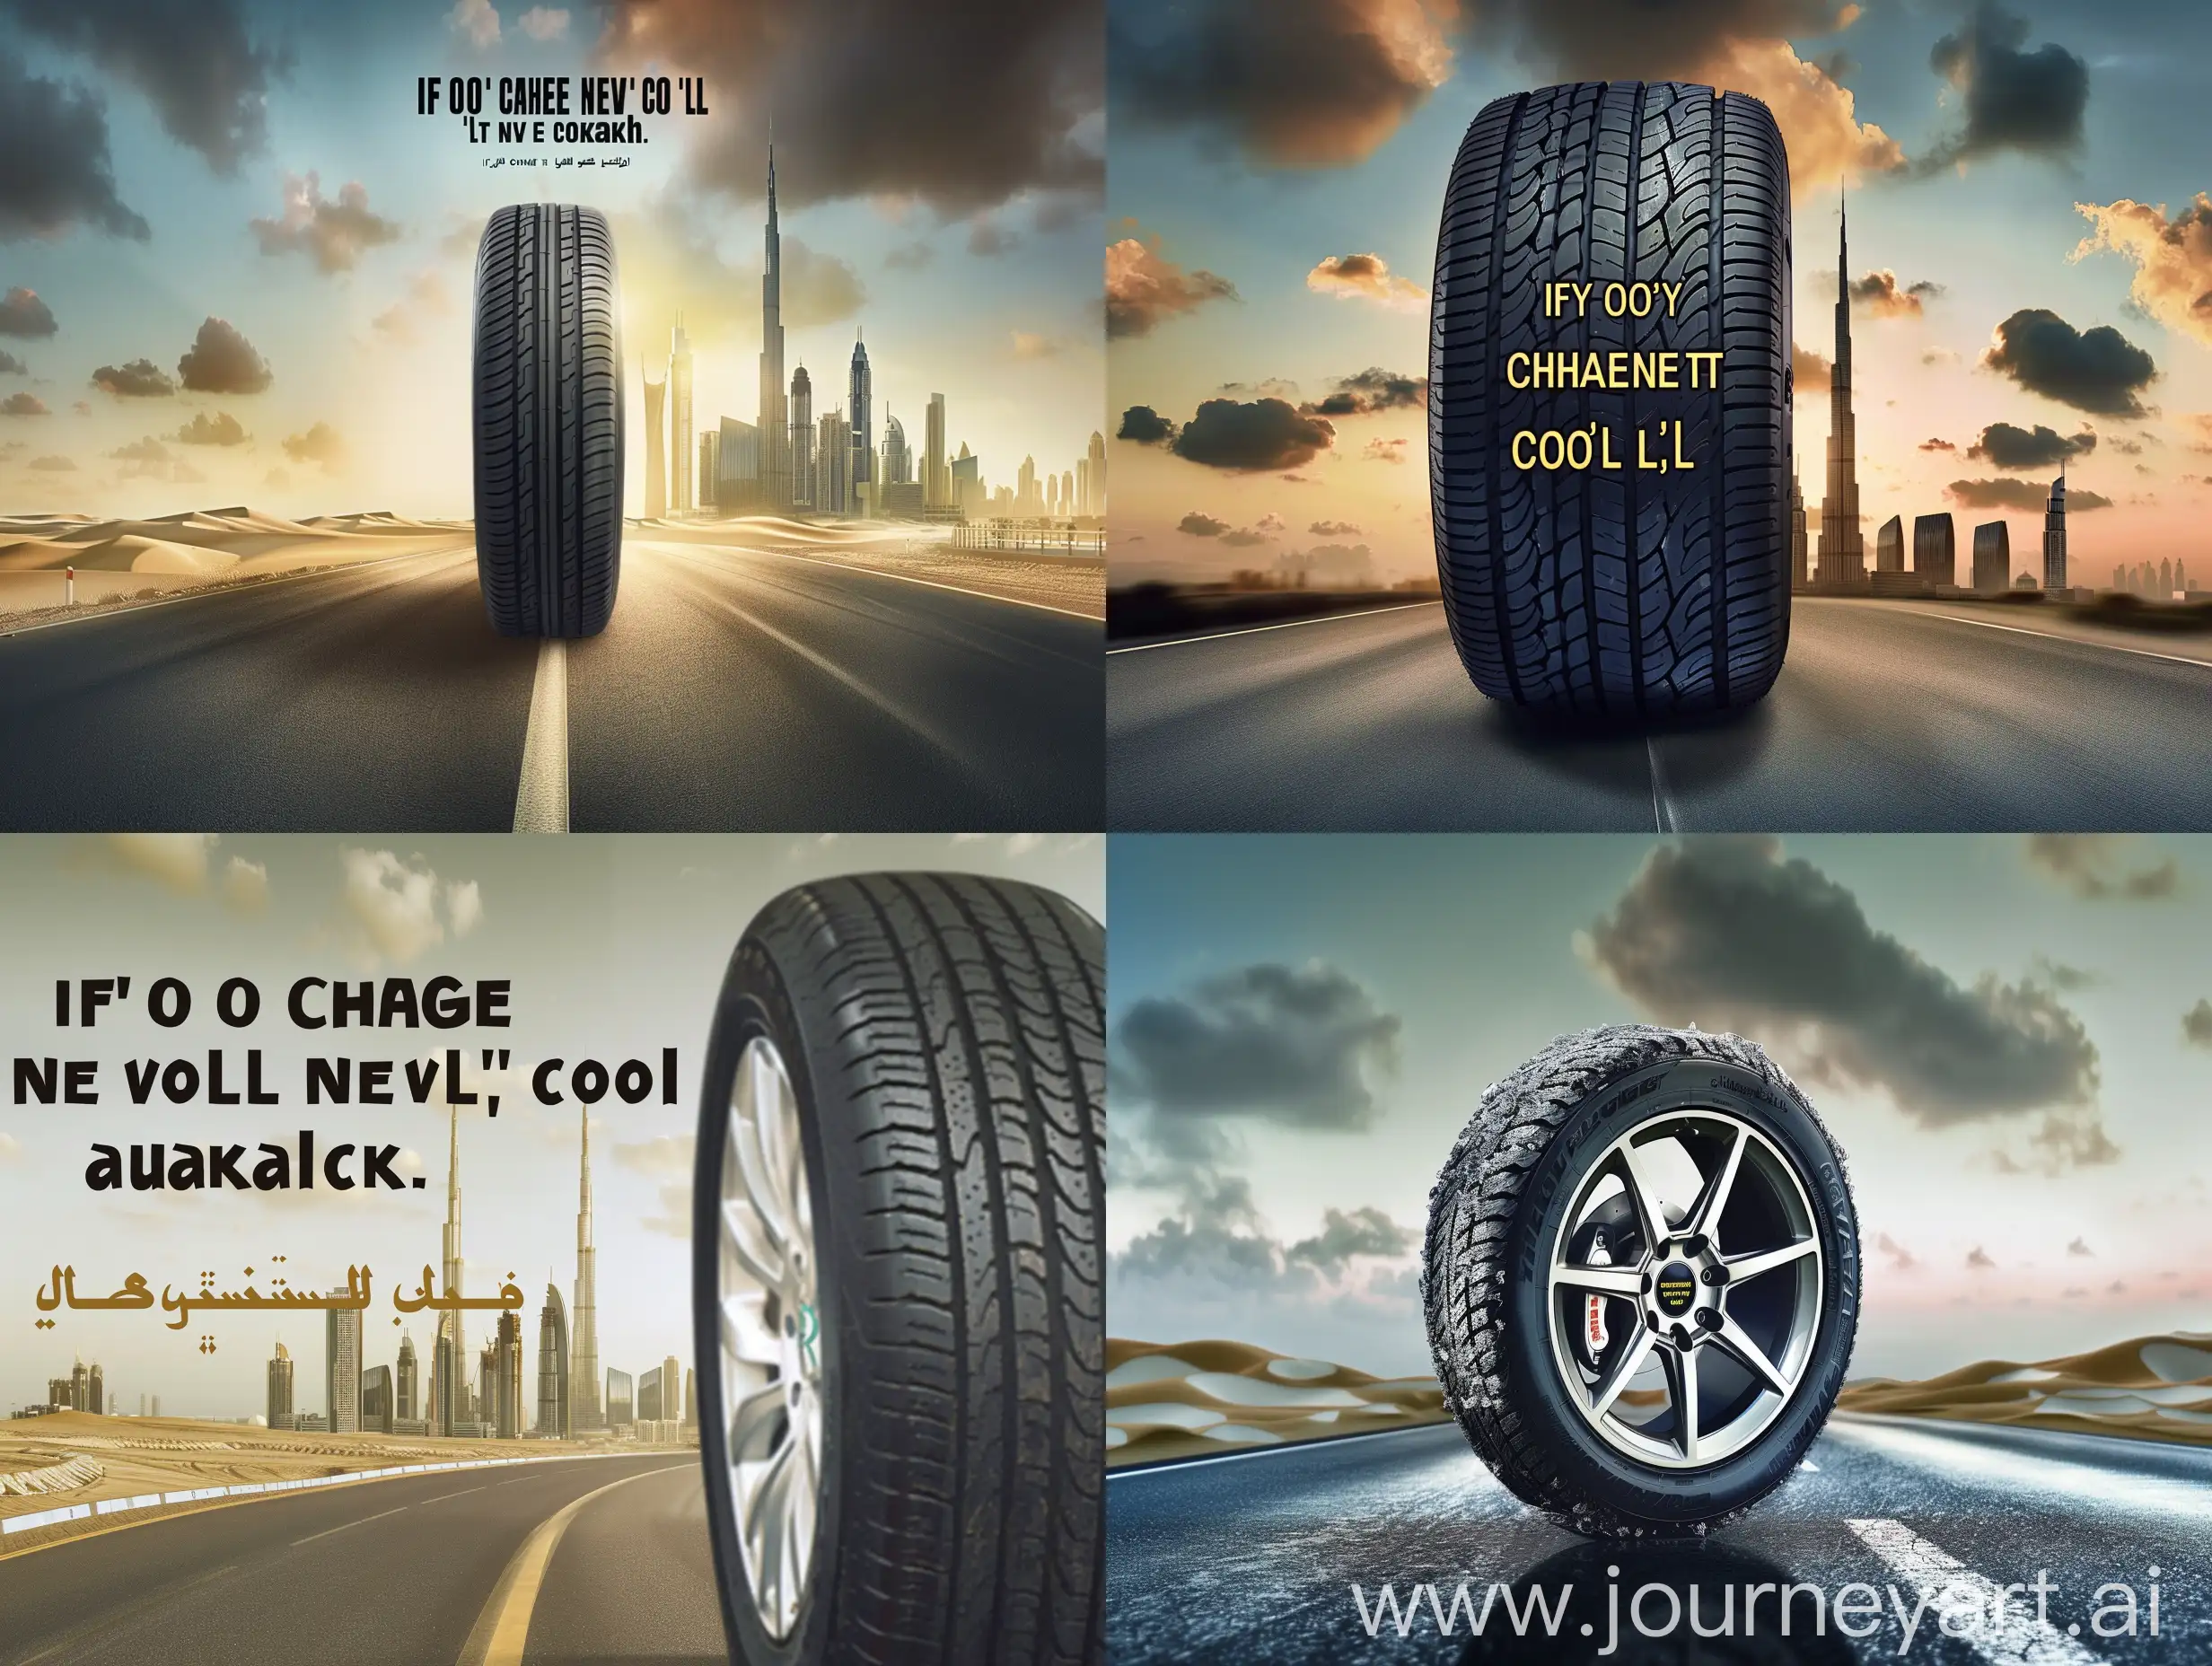 the best tire advertisement ina the country UAE with the heading of the advertisement "if you don't change it you'll never go anywhere"